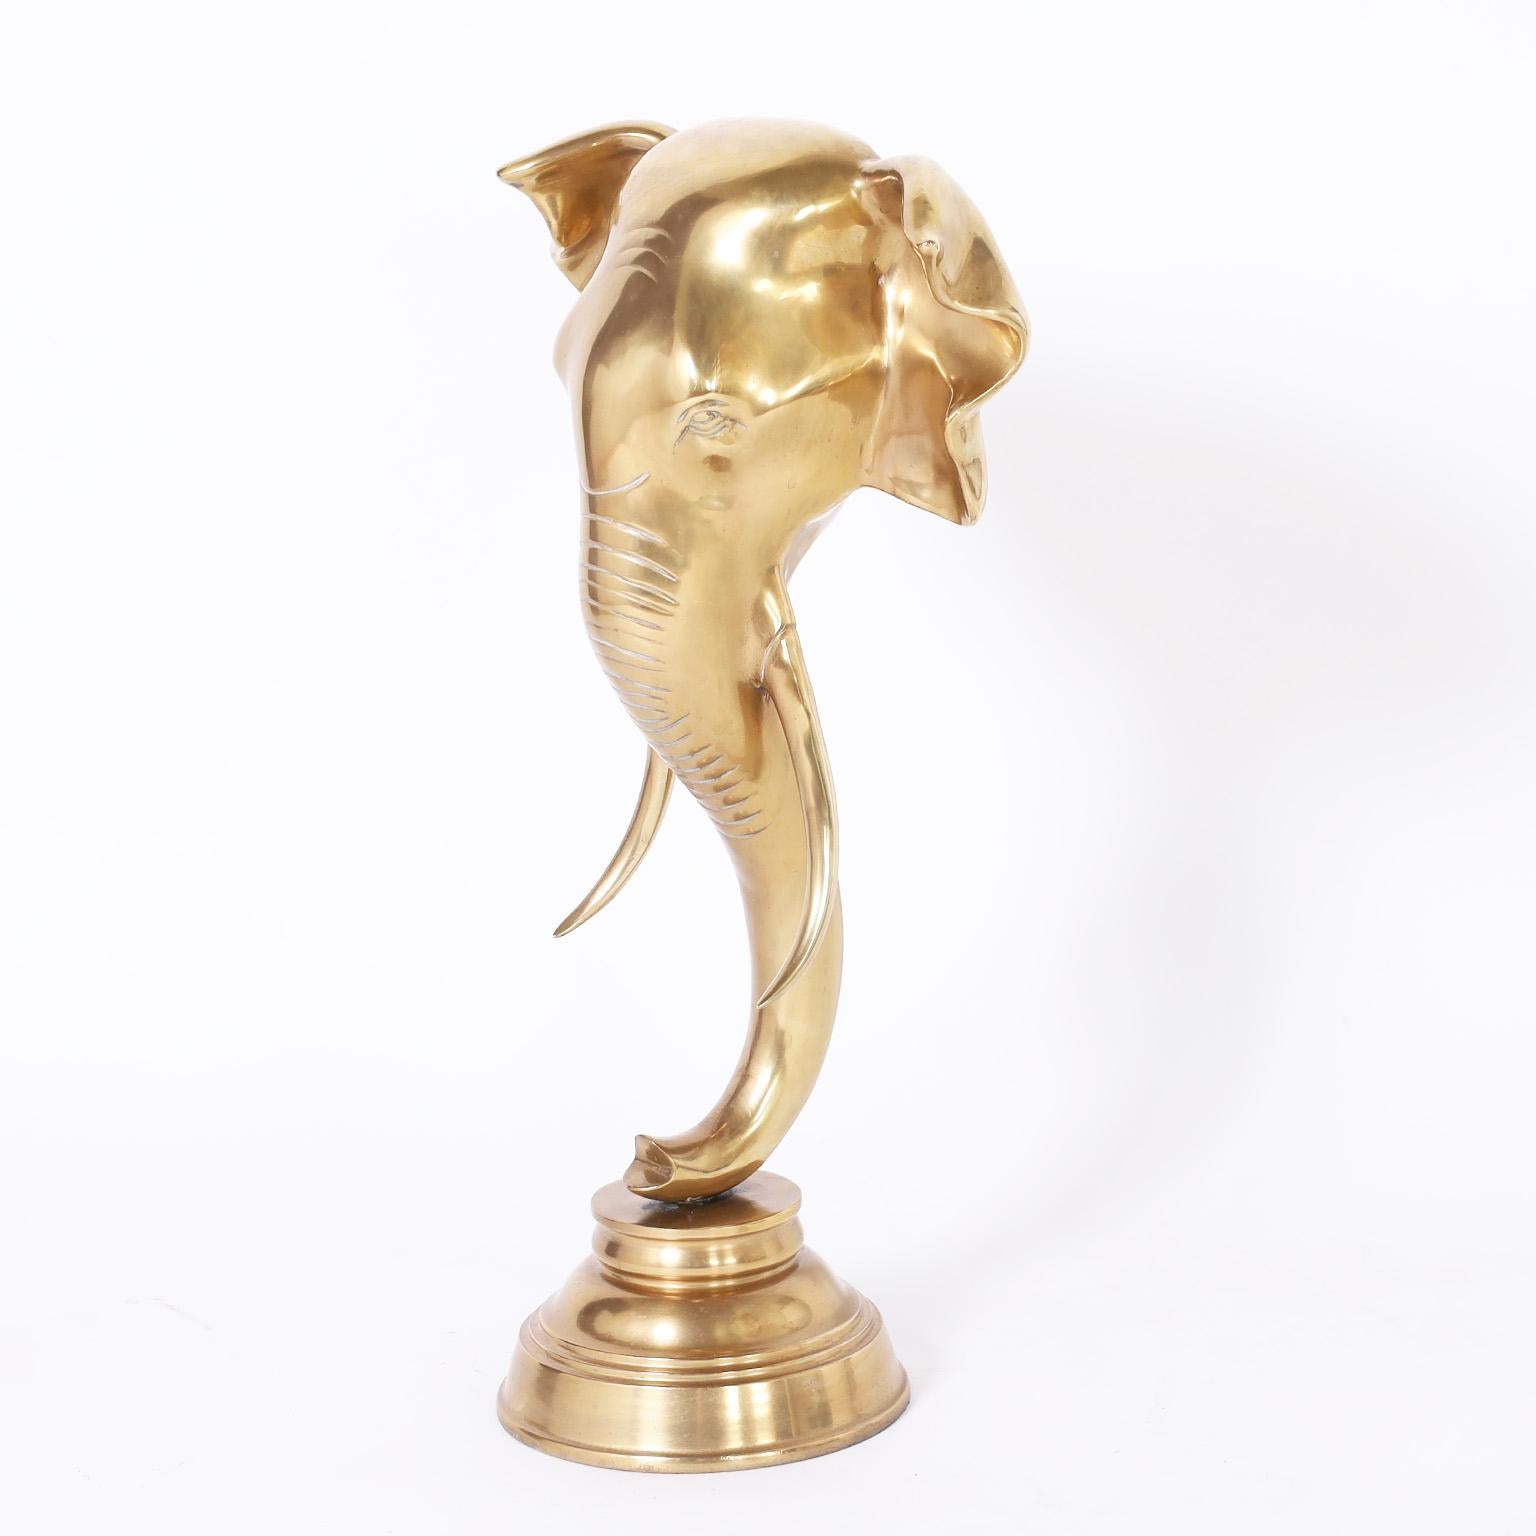 Standout Anglo Indian cast brass elephant head sculpture presented on a turned brass stand. Hand polished and lacquered for easy care.